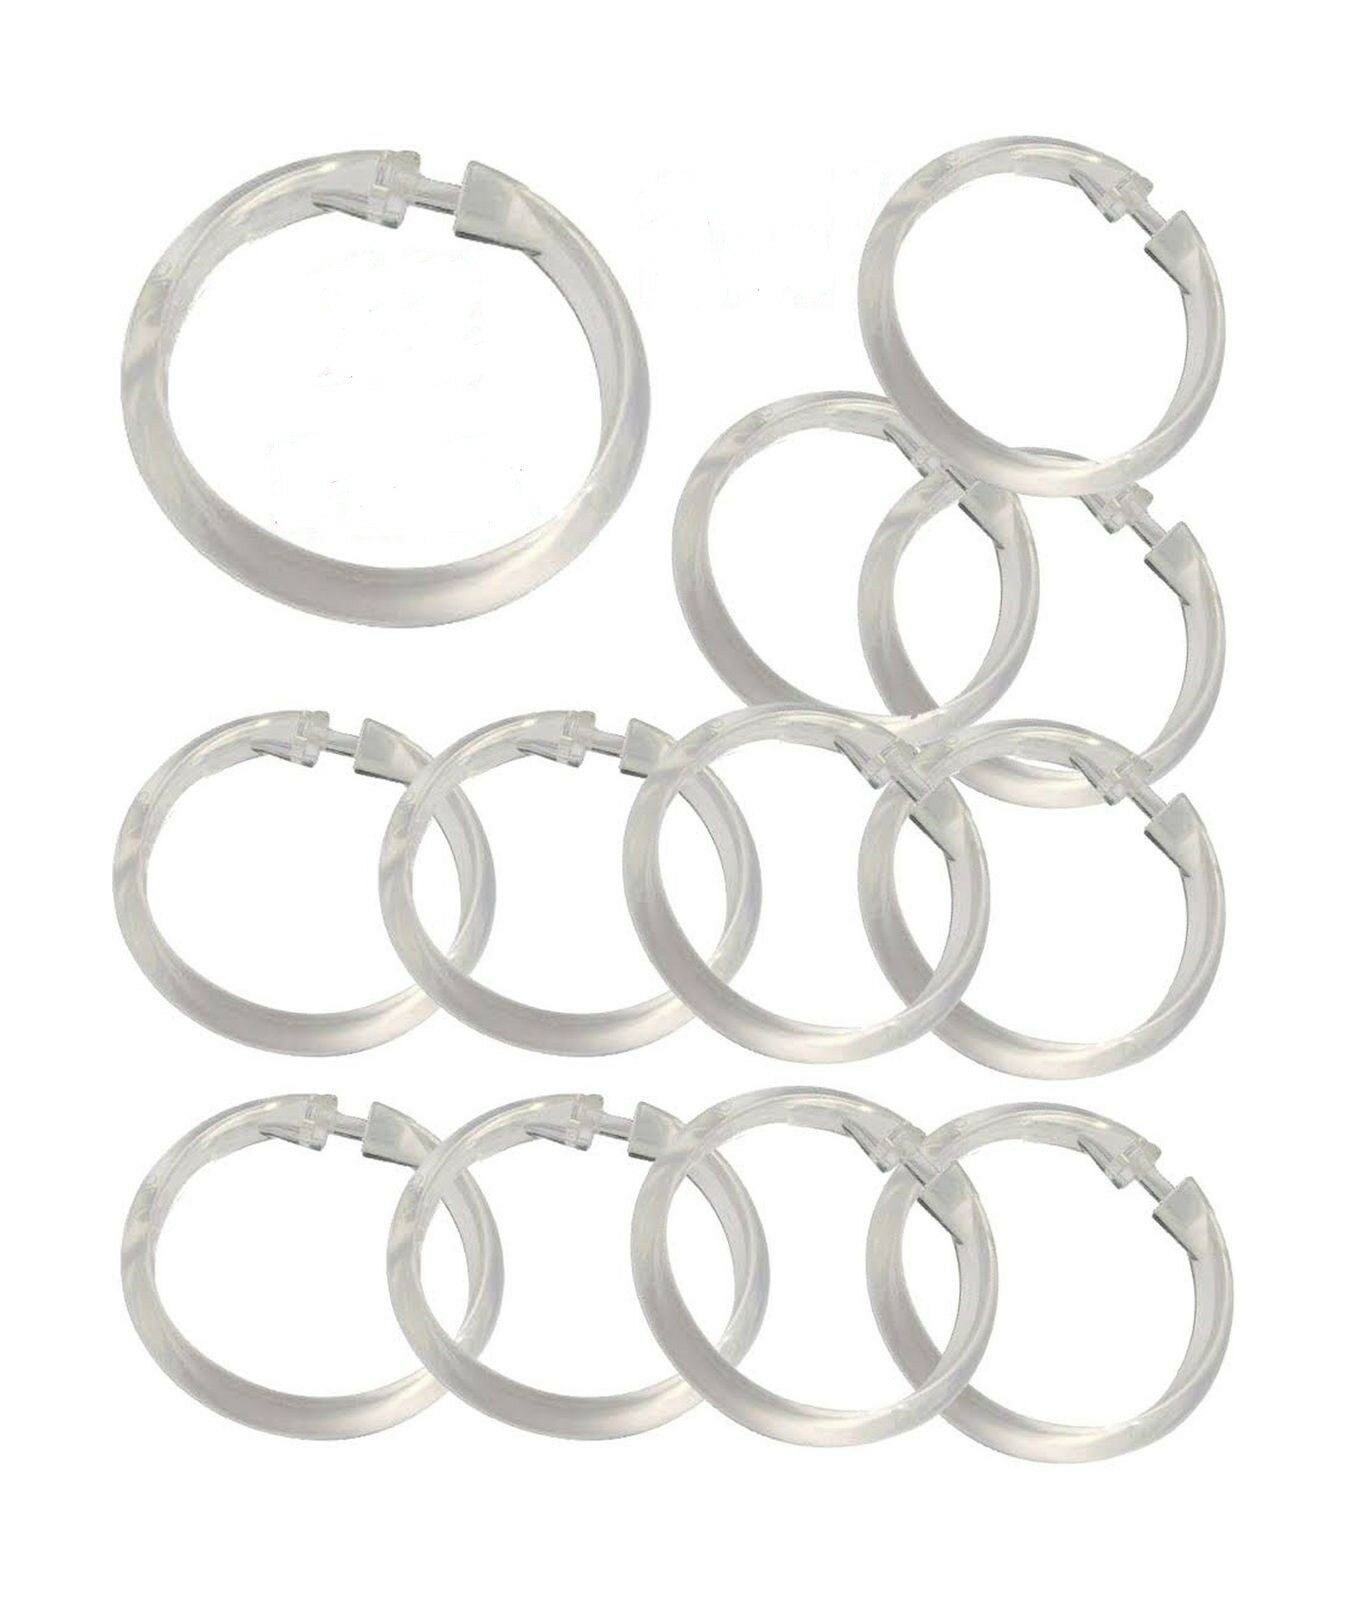 Set Of 12 Easy-to-use Plastic Snap On Shower Curtain Rings / Hooks All Colors